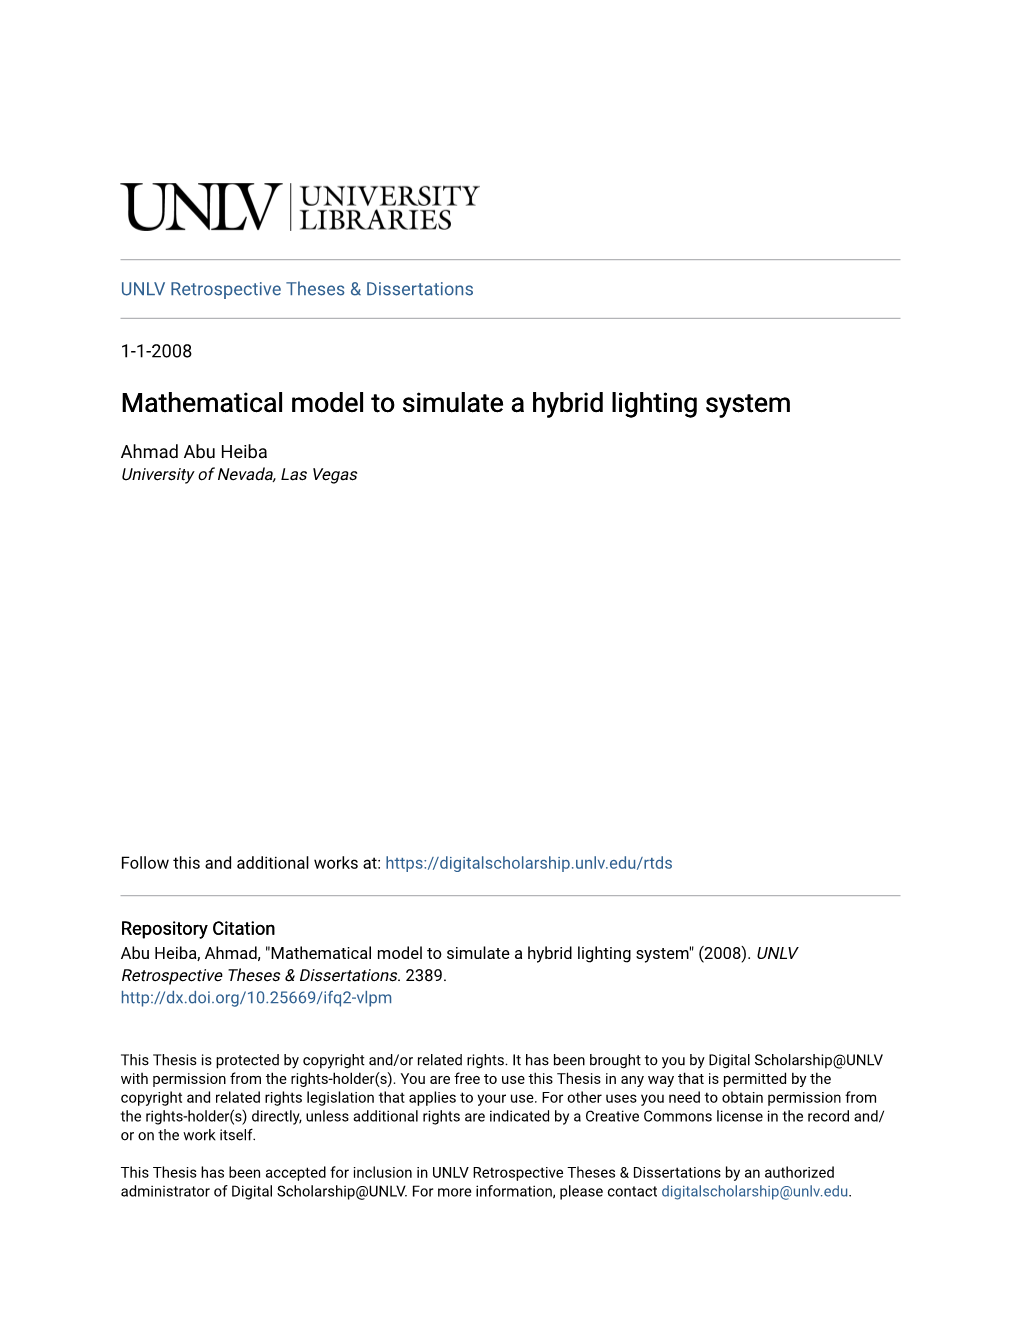 Mathematical Model to Simulate a Hybrid Lighting System